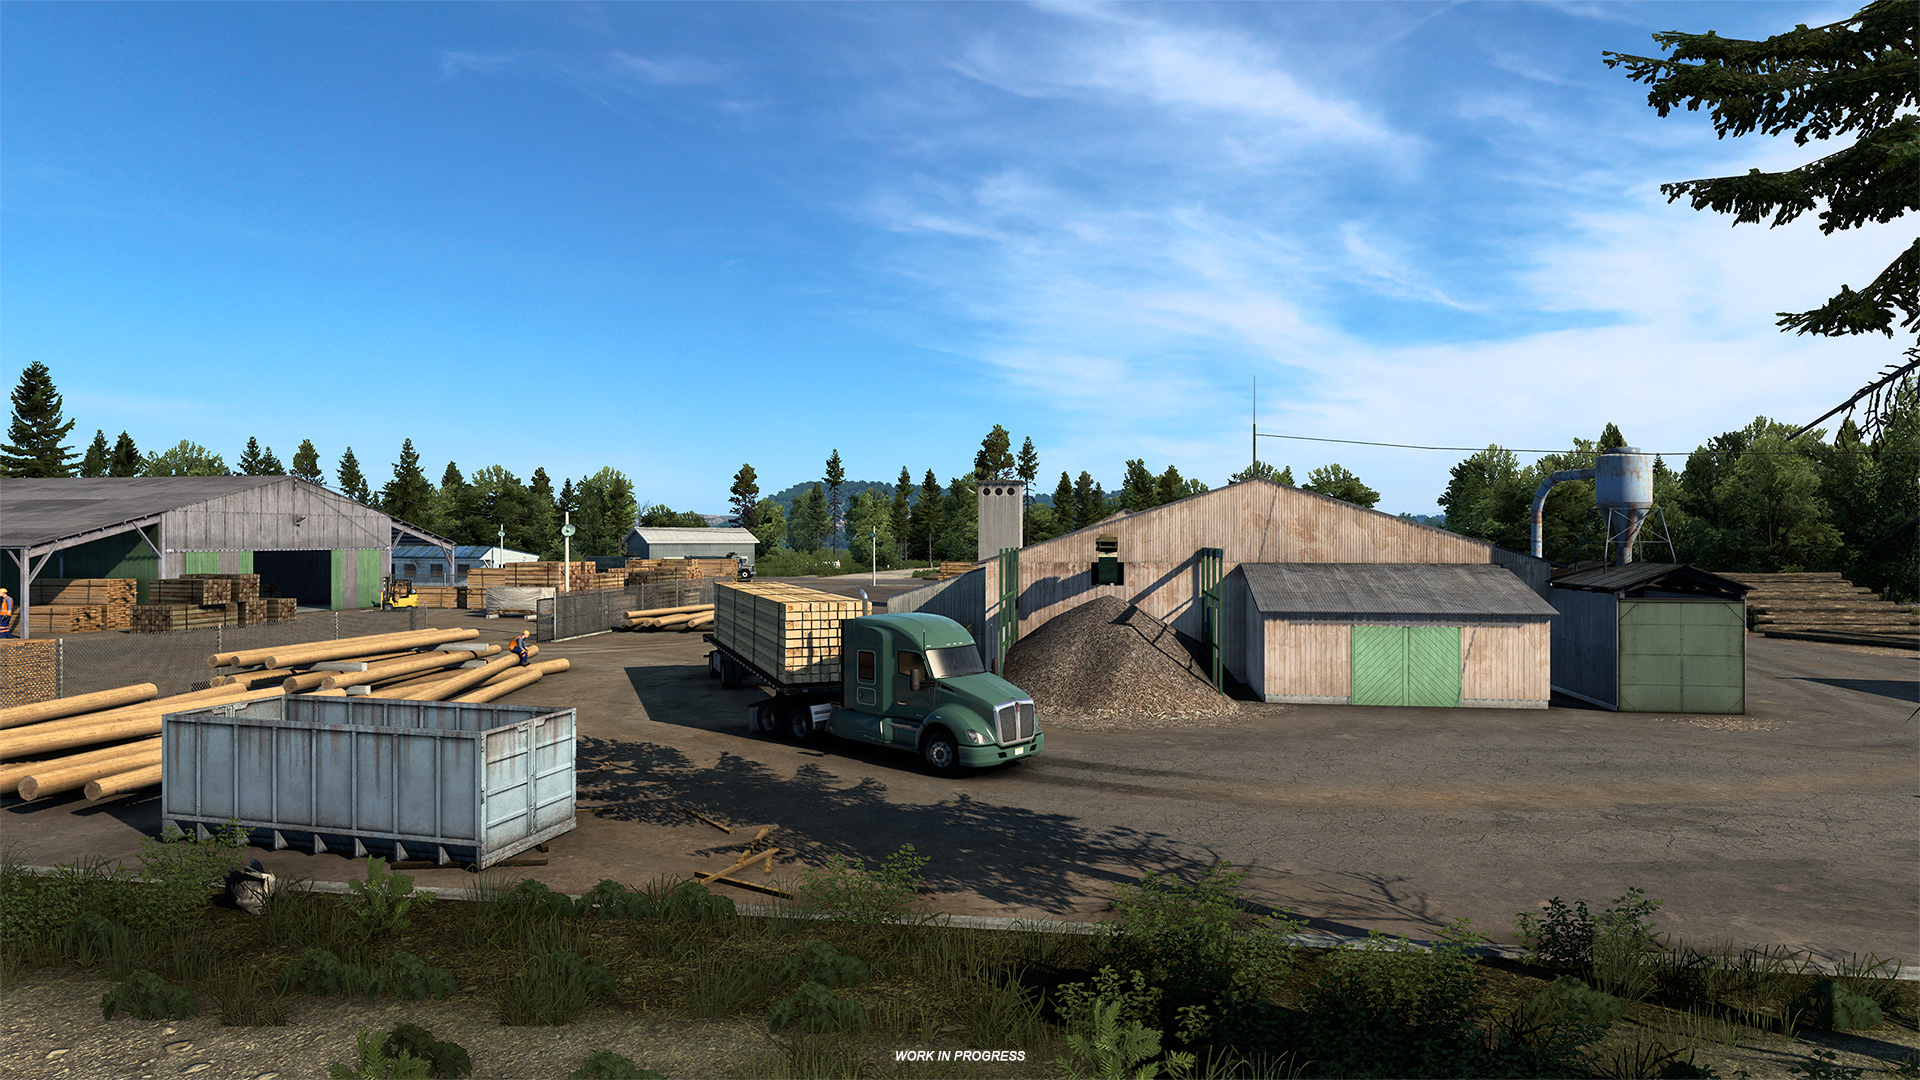 Upcoming American Truck Simulator Texas DLC features logging industry